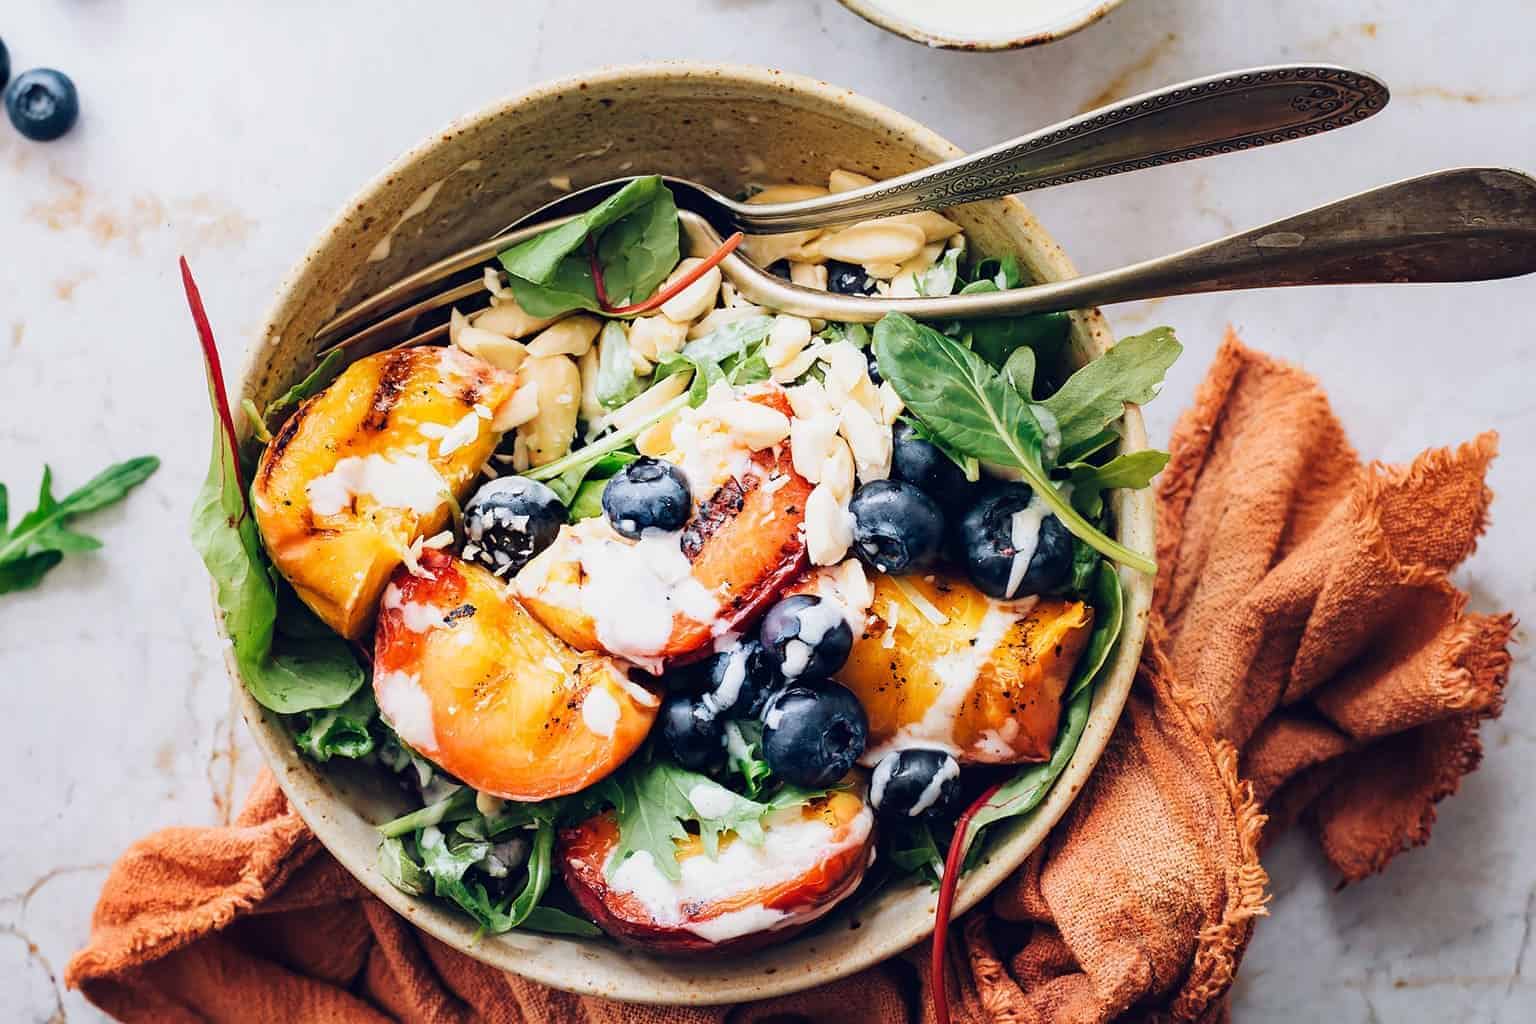 Grilled peach salad recipe from Hello Veggie